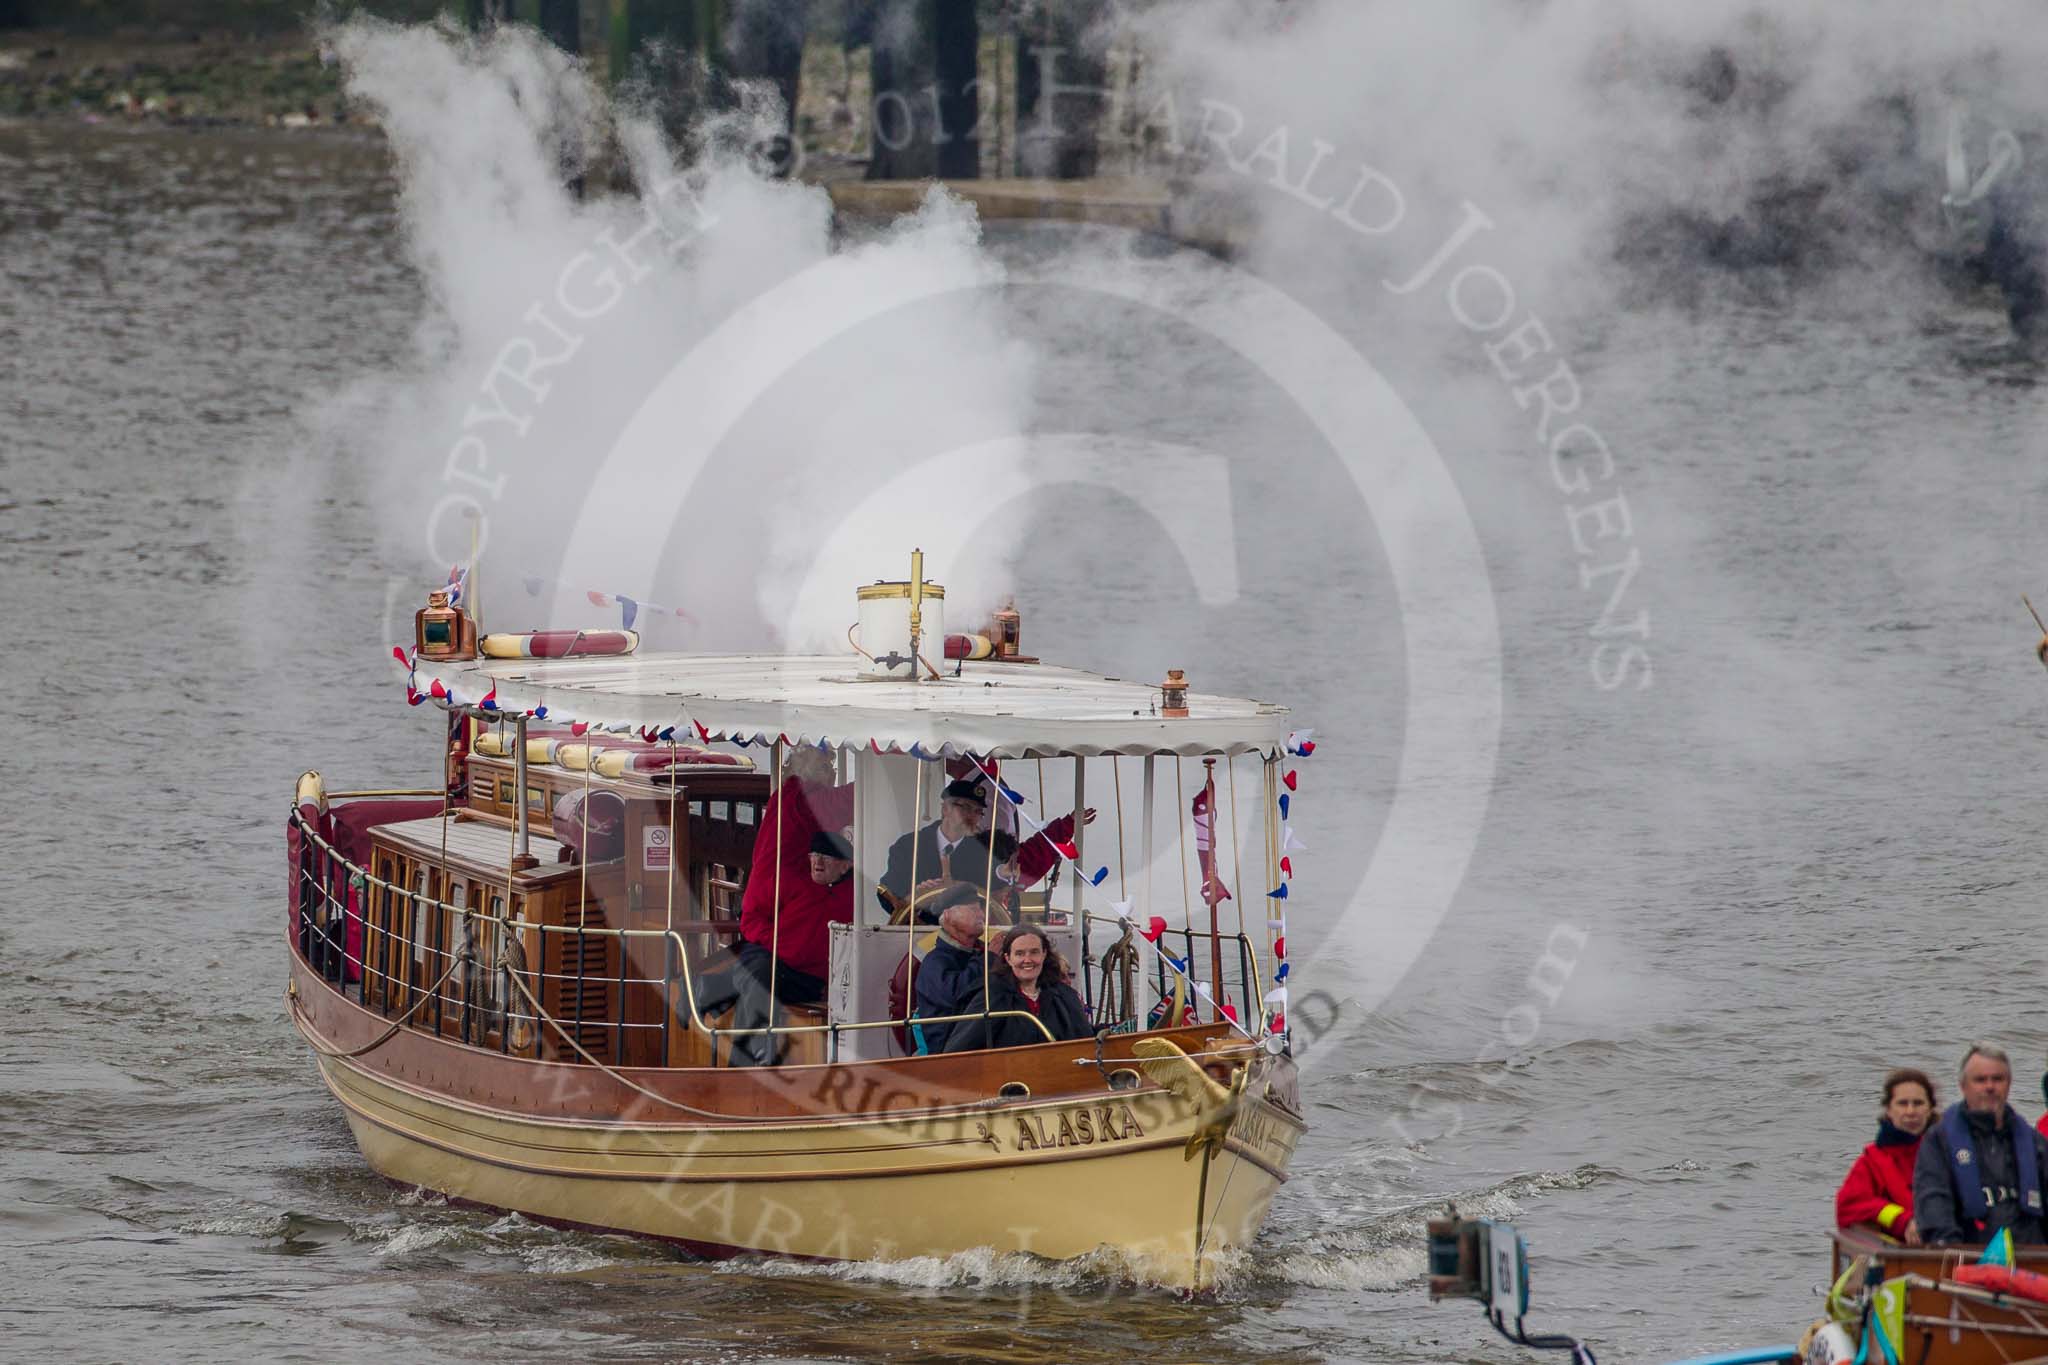 Thames Diamond Jubilee Pageant: STEAM LAUNCHES-Alaska (H142)..
River Thames seen from Battersea Bridge,
London,

United Kingdom,
on 03 June 2012 at 15:35, image #401